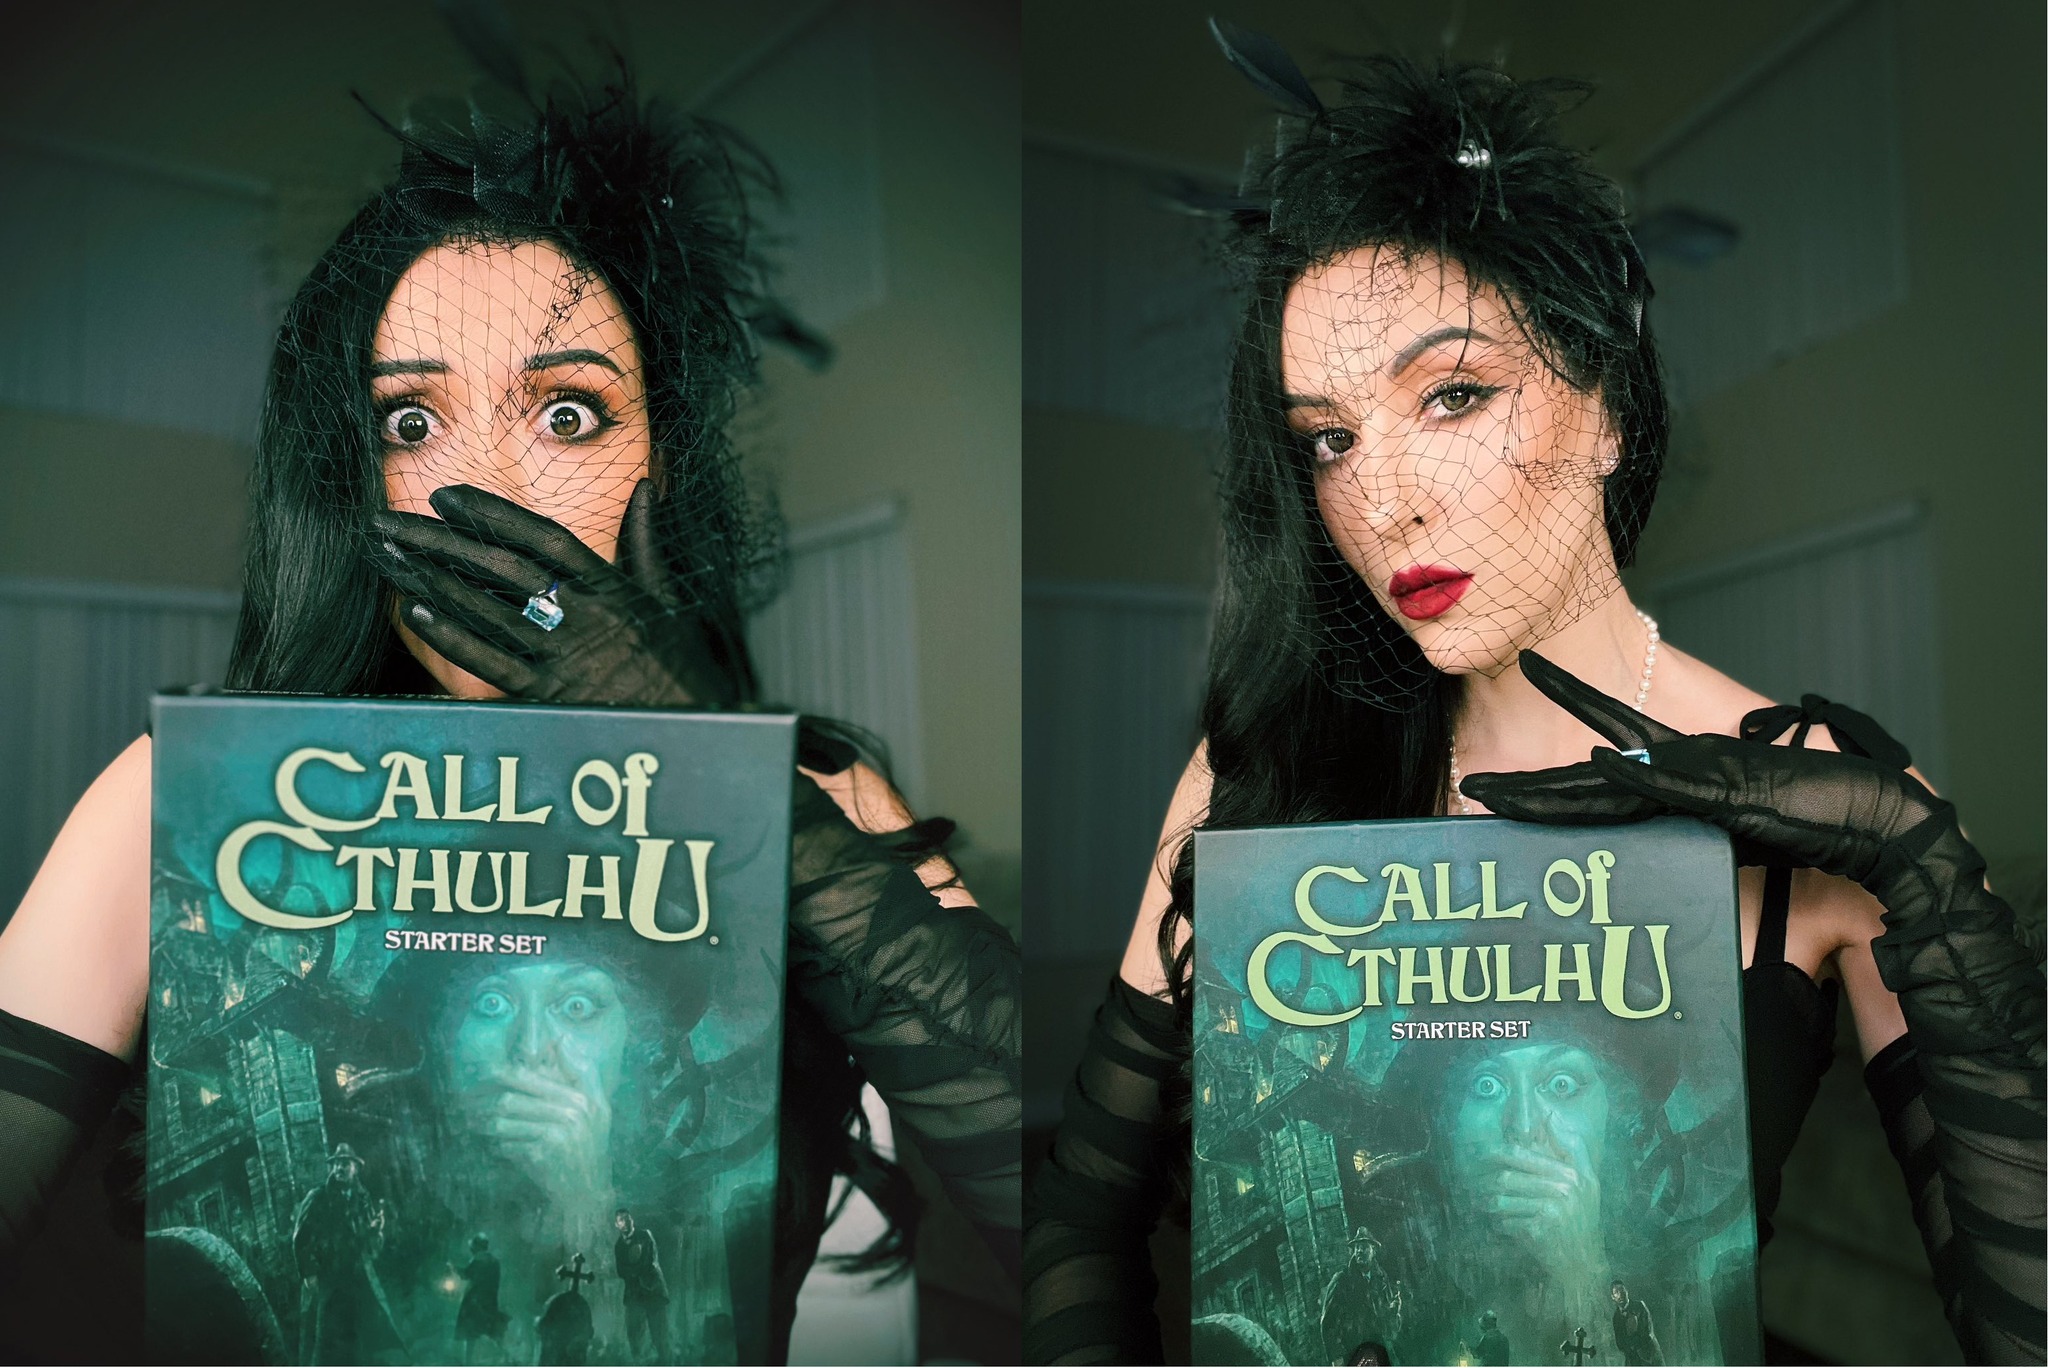 Noura shows off the Call of Cthulhu Starter Set